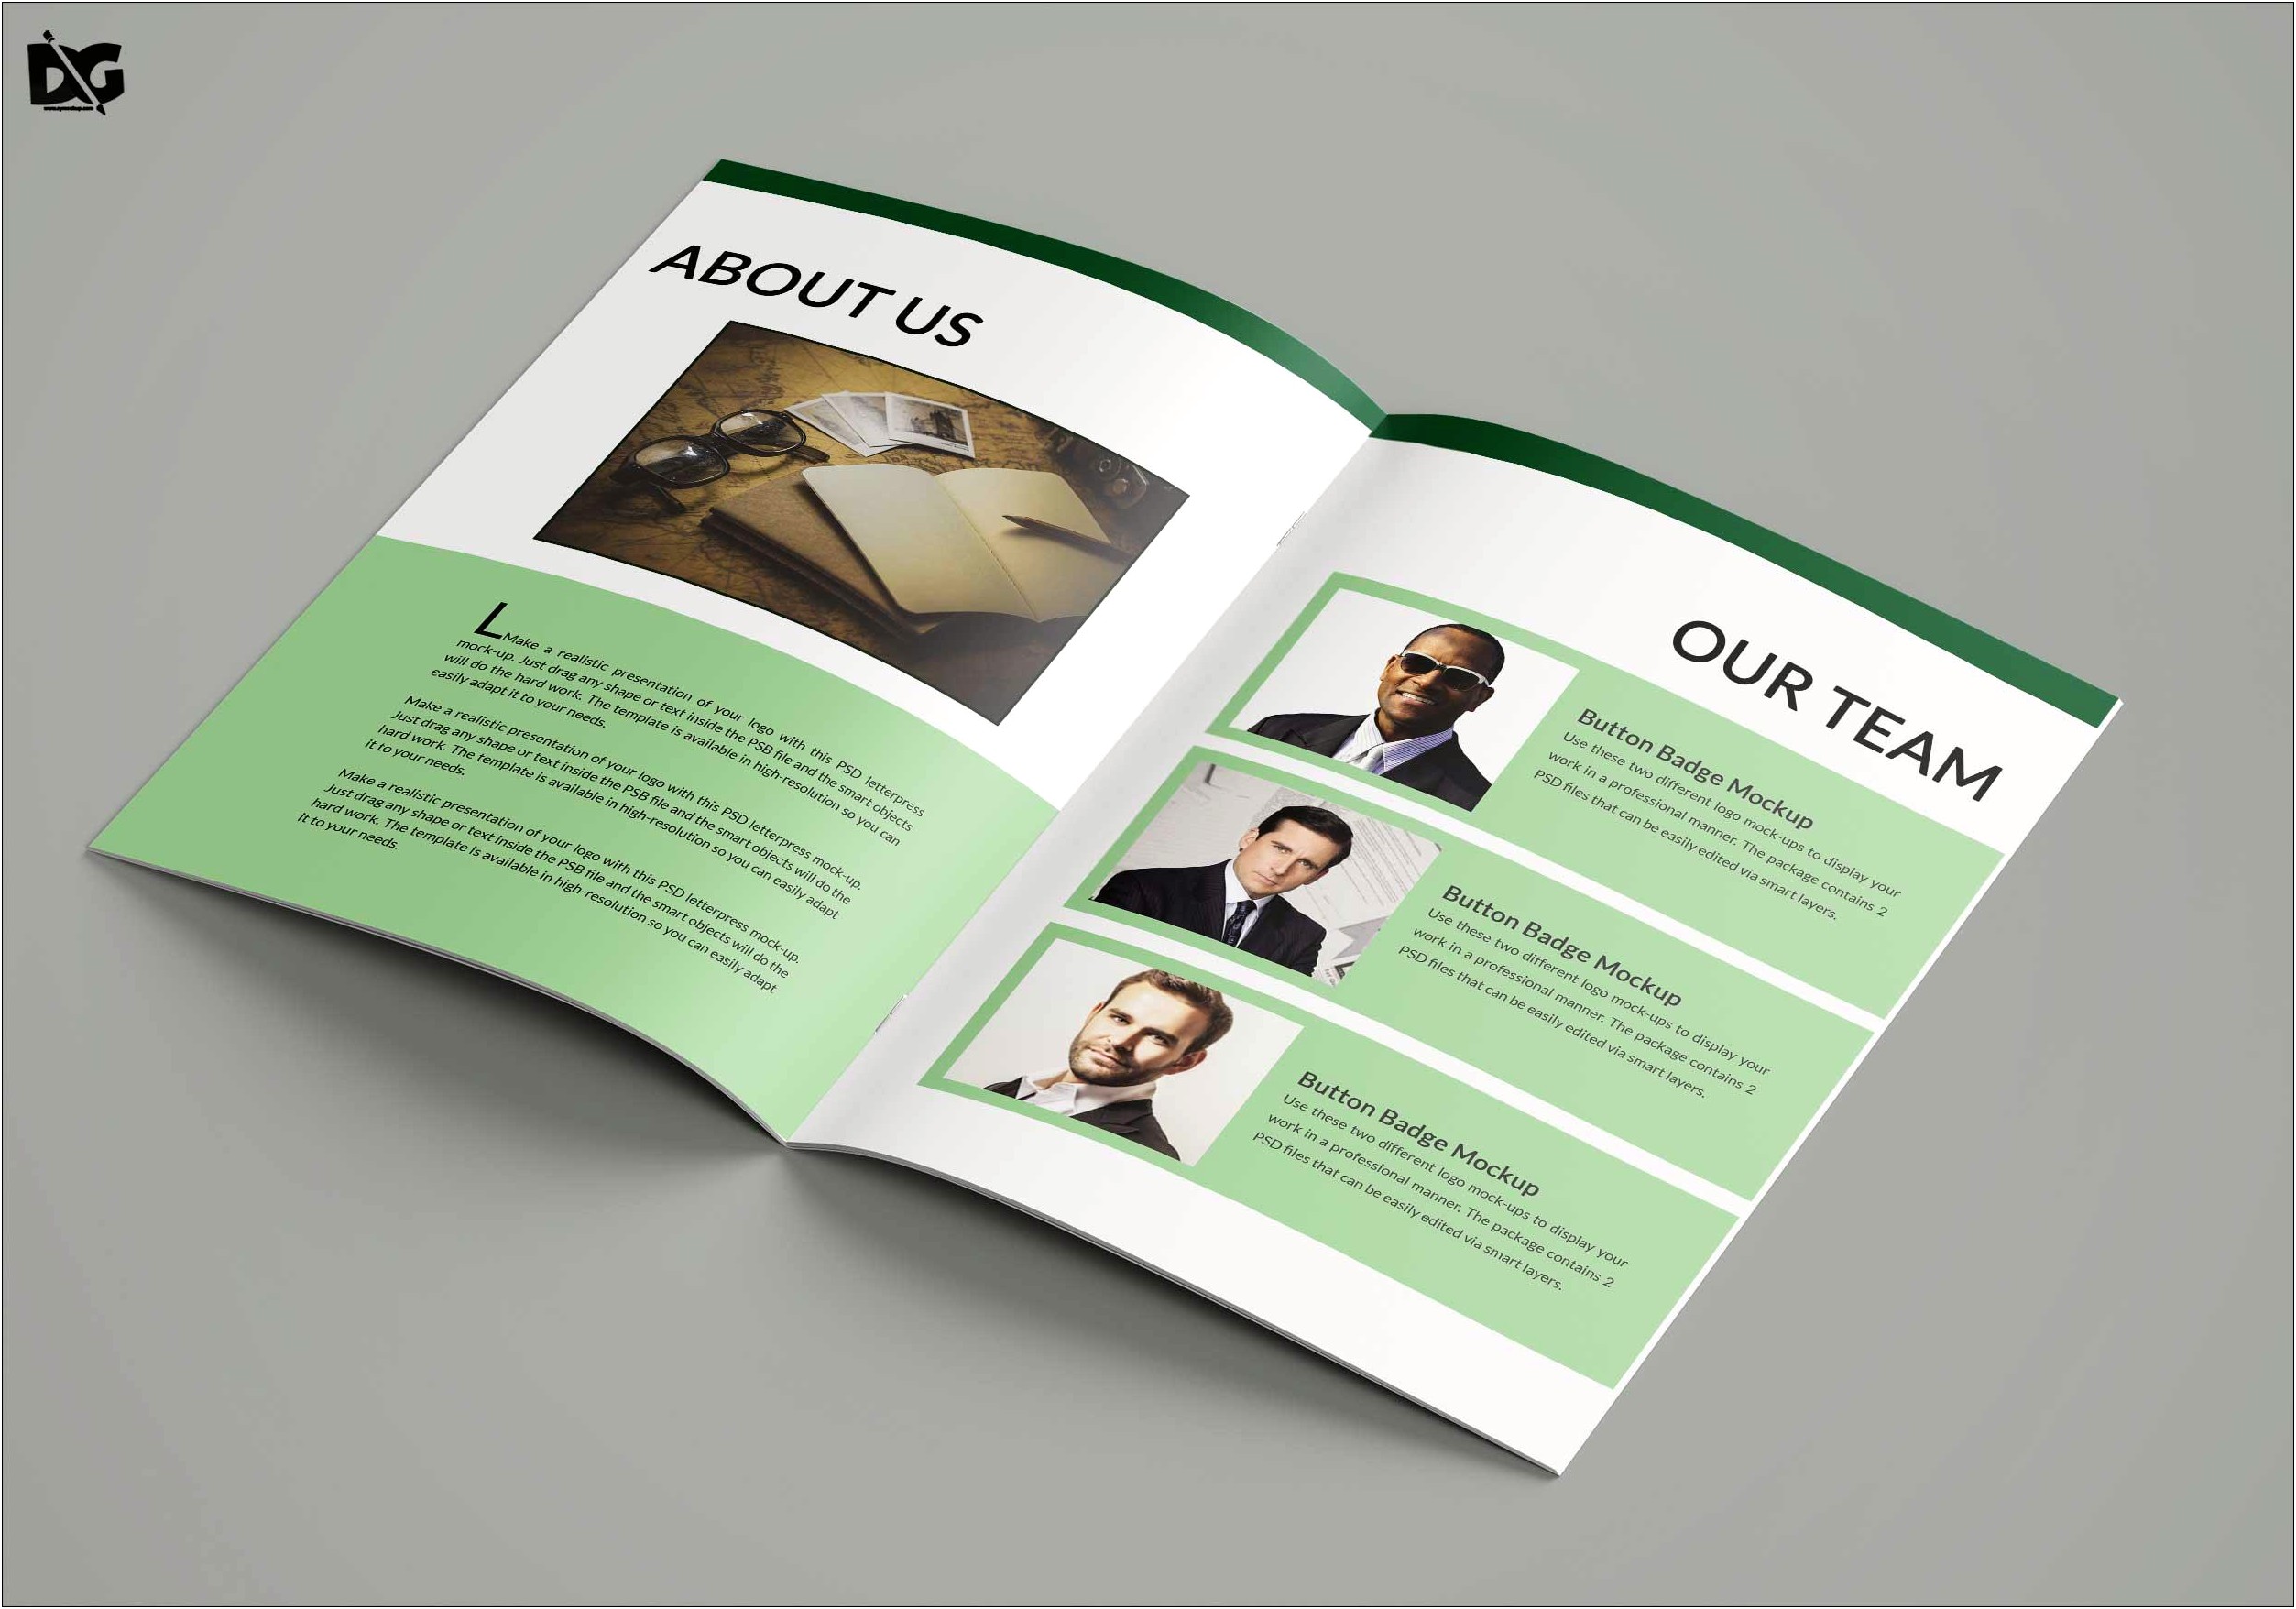 Business Proposal Template Psd Free Download